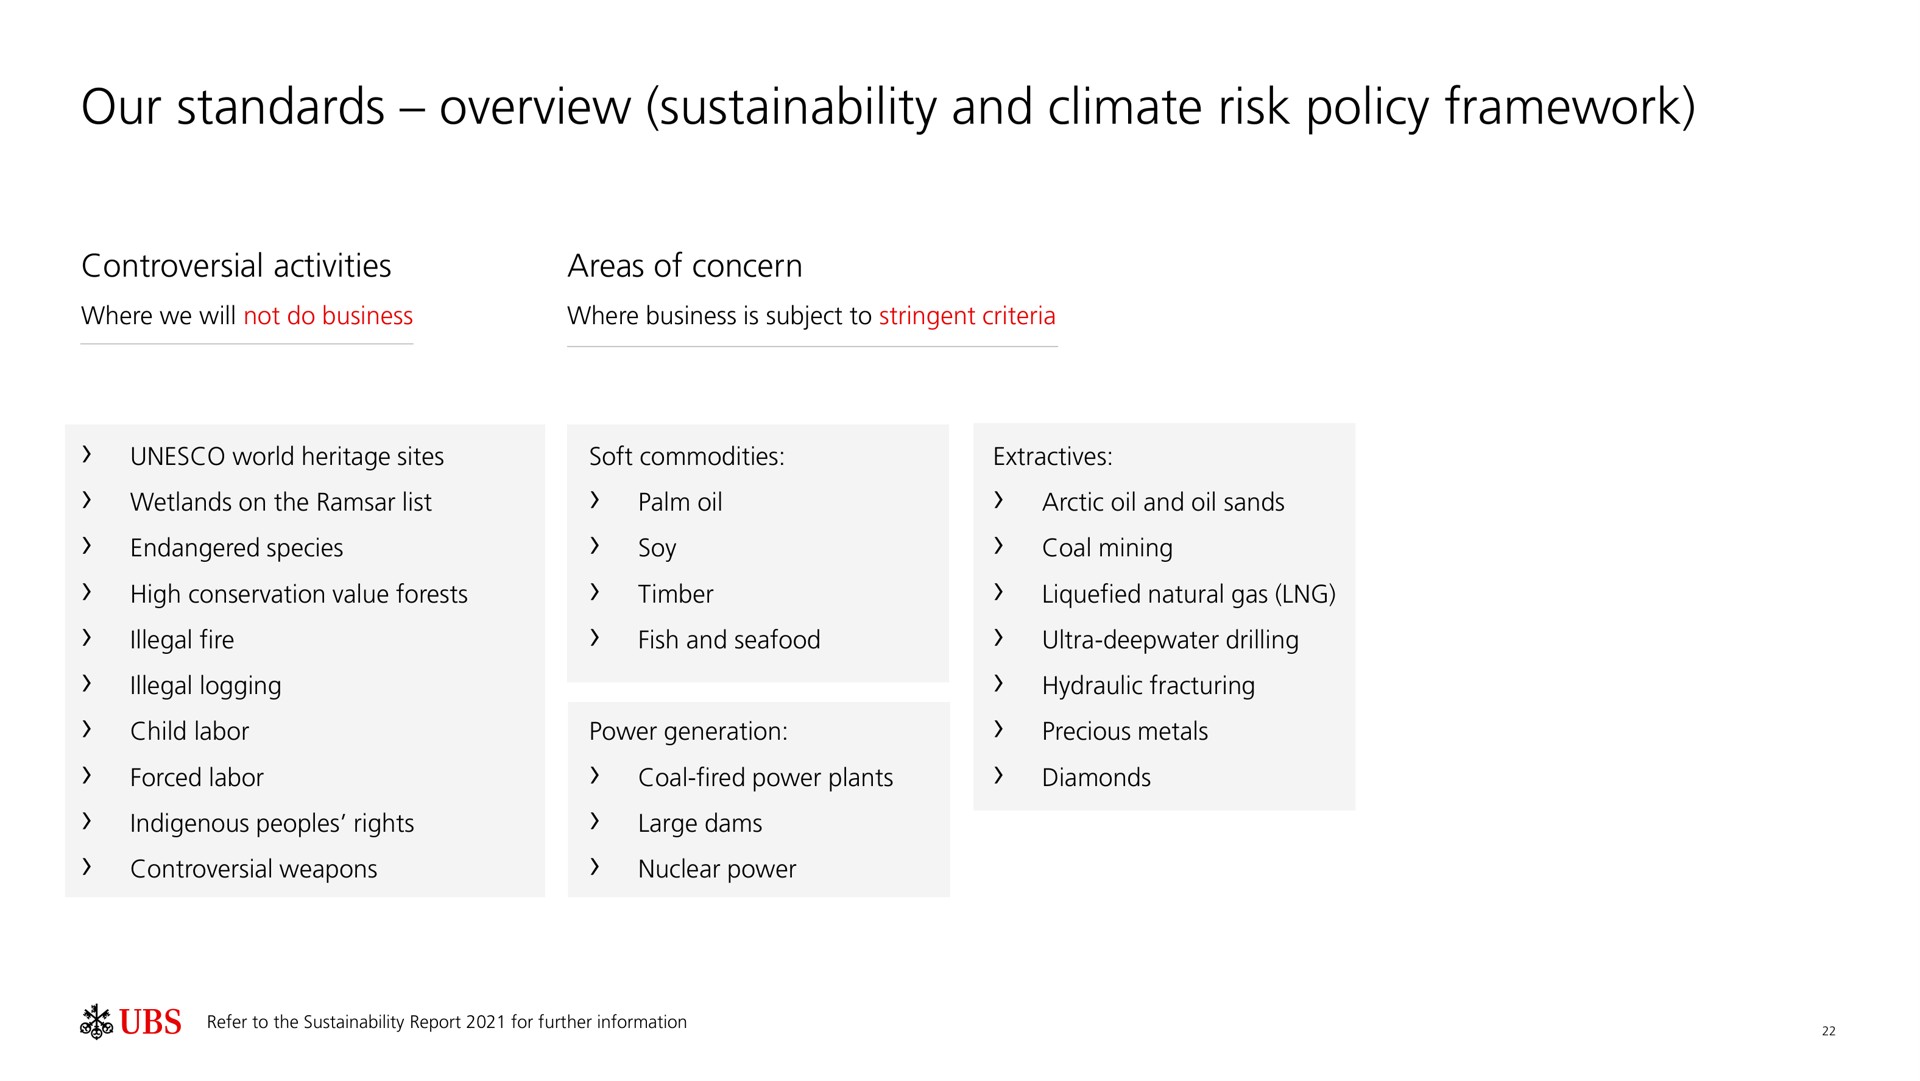 our standards overview and climate risk policy framework | UBS